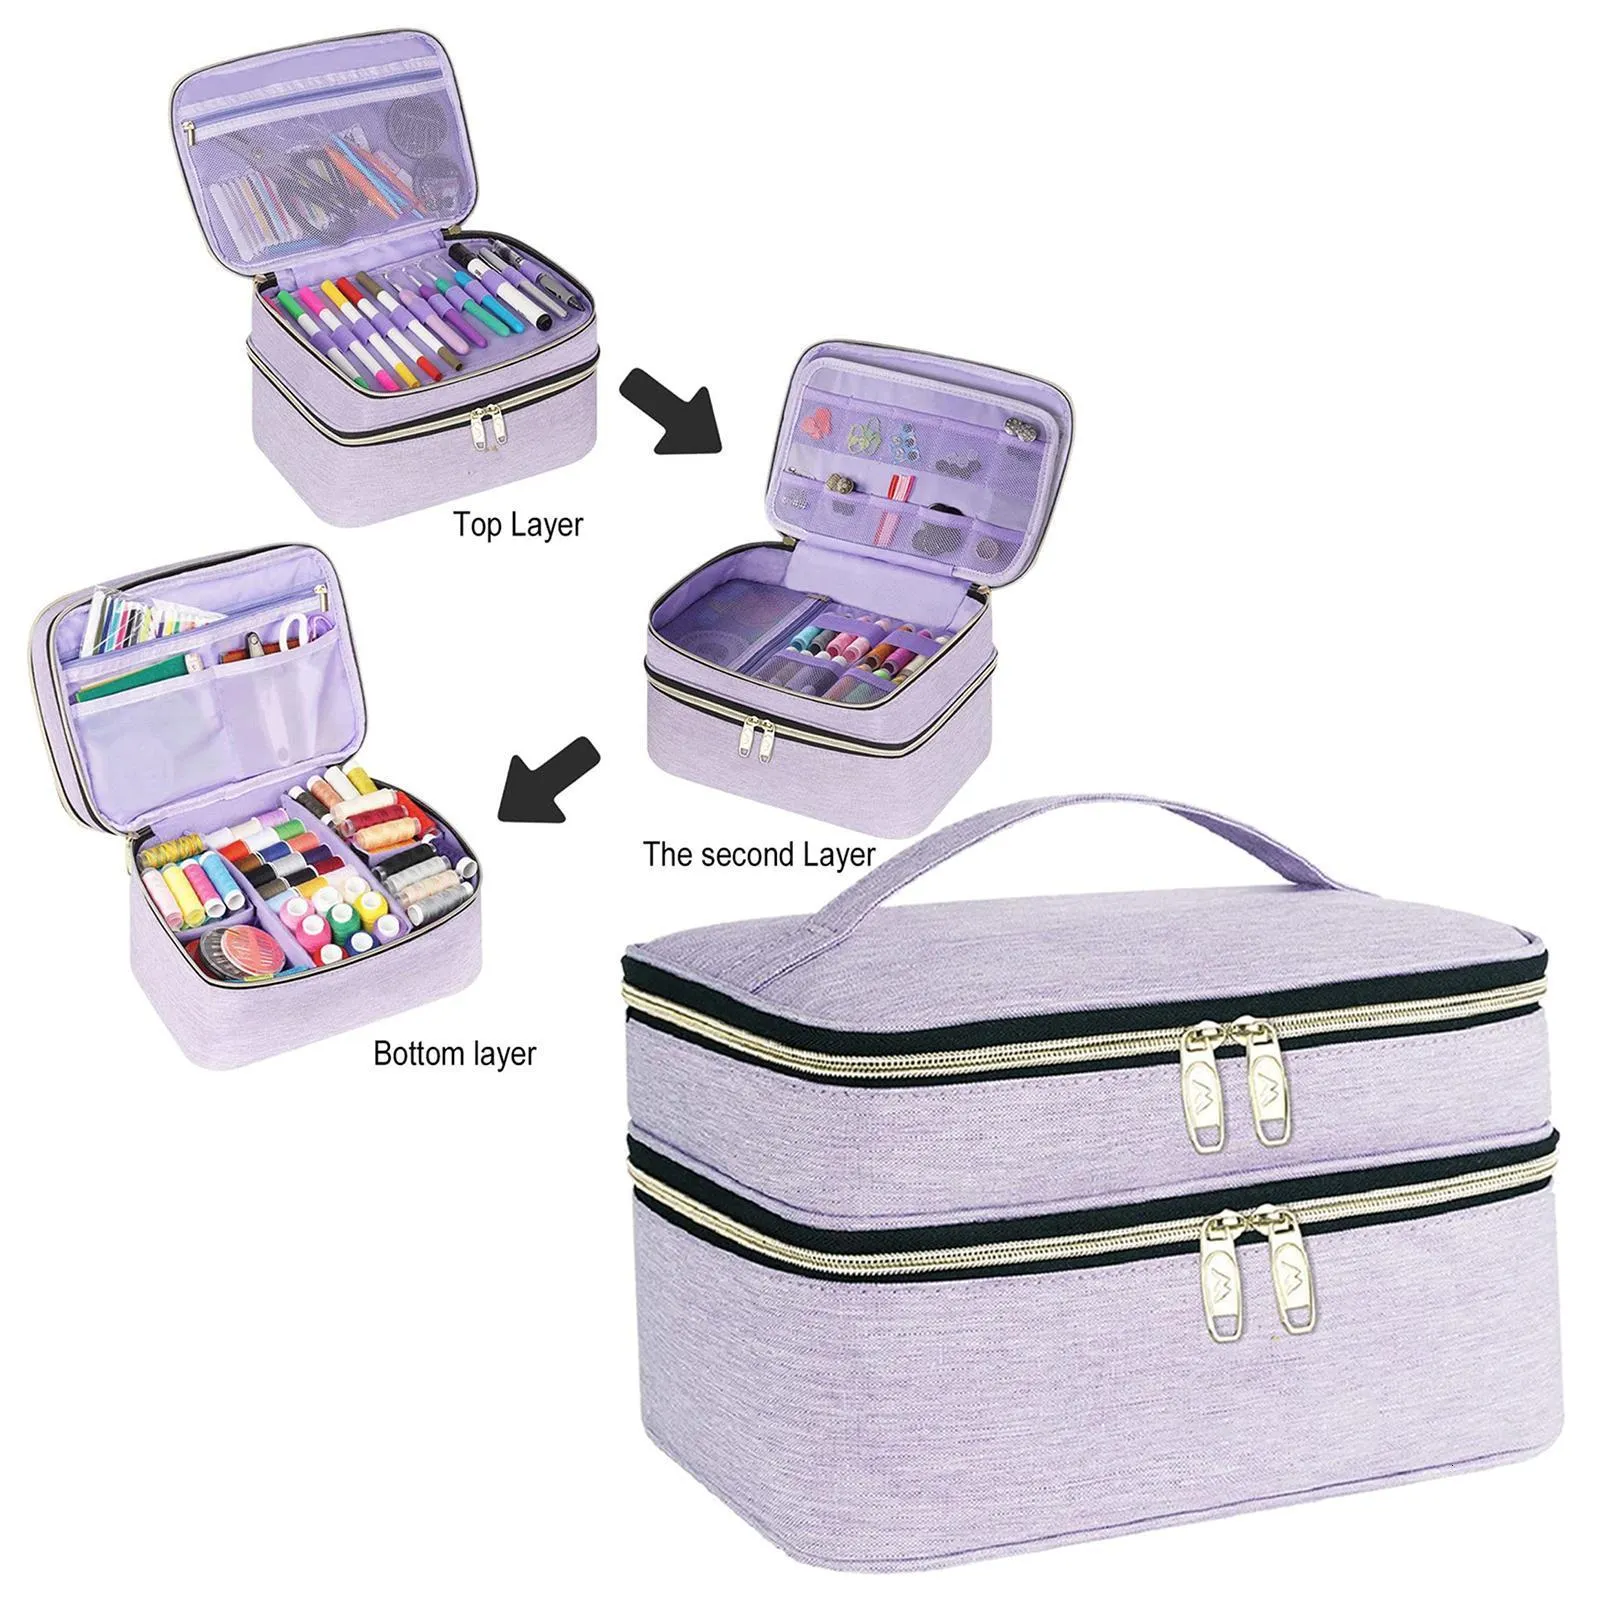 Portable Double Layer Sewing Travel Organizer Bag For Yarn